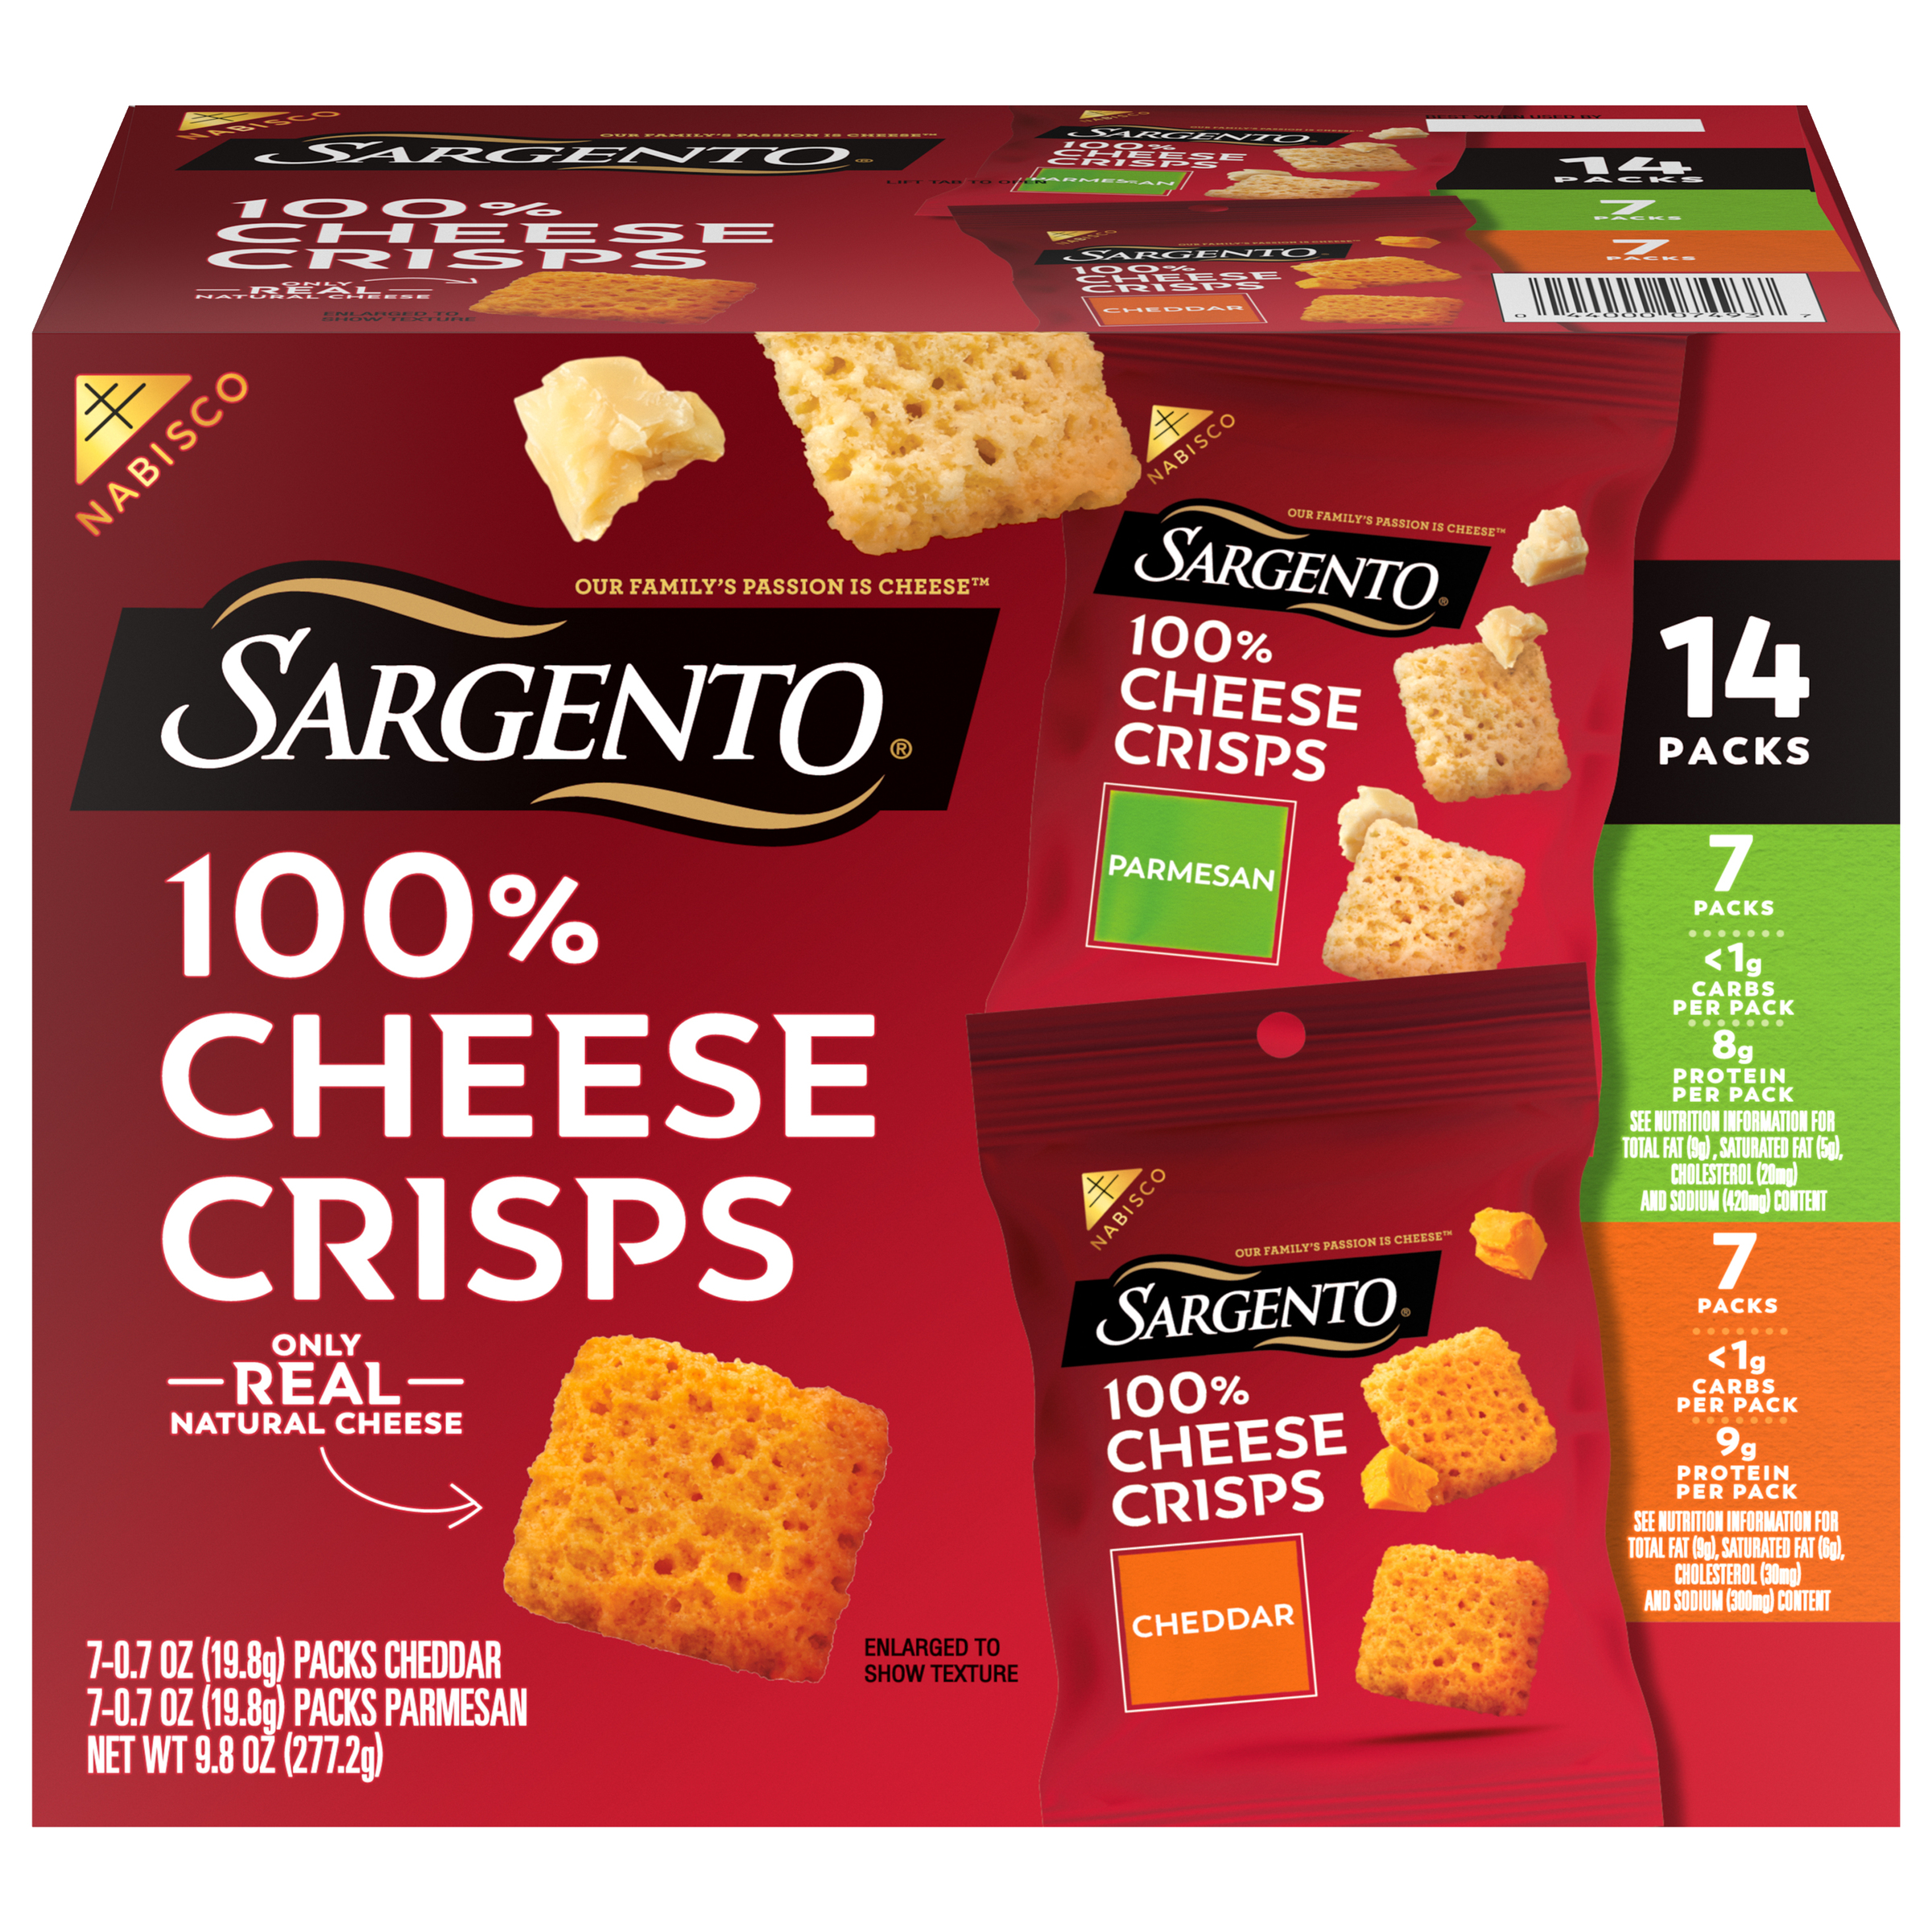 SARGENTO® 100% Cheese Crisps Variety Pack, Parmesan and Cheddar, 14 Snack Packs